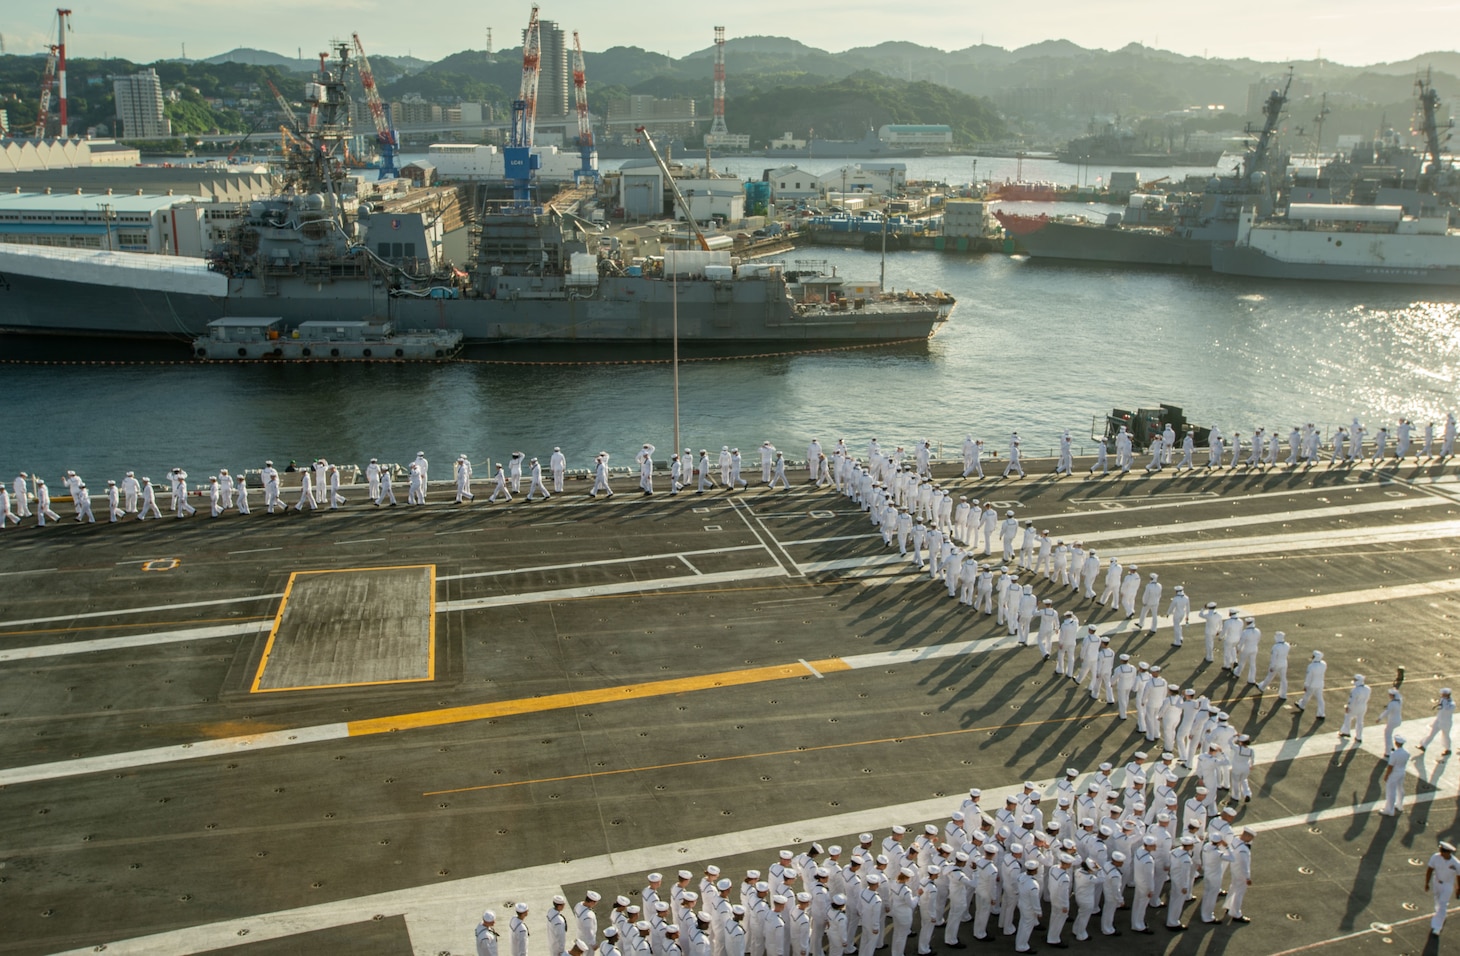 220912-N-JO823-1021 YOKOSUKA, Japan (Sept. 12, 2022) Sailors man the rails aboard the U.S. Navy’s only forward-deployed aircraft carrier, USS Ronald Reagan (CVN 76), as the ship departs Commander, Fleet Activities Yokosuka, Sept. 12. Ronald Reagan, the flagship of Carrier Strike Group 5, provides a combat-ready force that protects and defends the United States, and supports alliances, partnerships and collective maritime interests in the Indo-Pacific region. (U.S. Navy photo by Mass Communication Specialist Seaman Natasha ChevalierLosada)